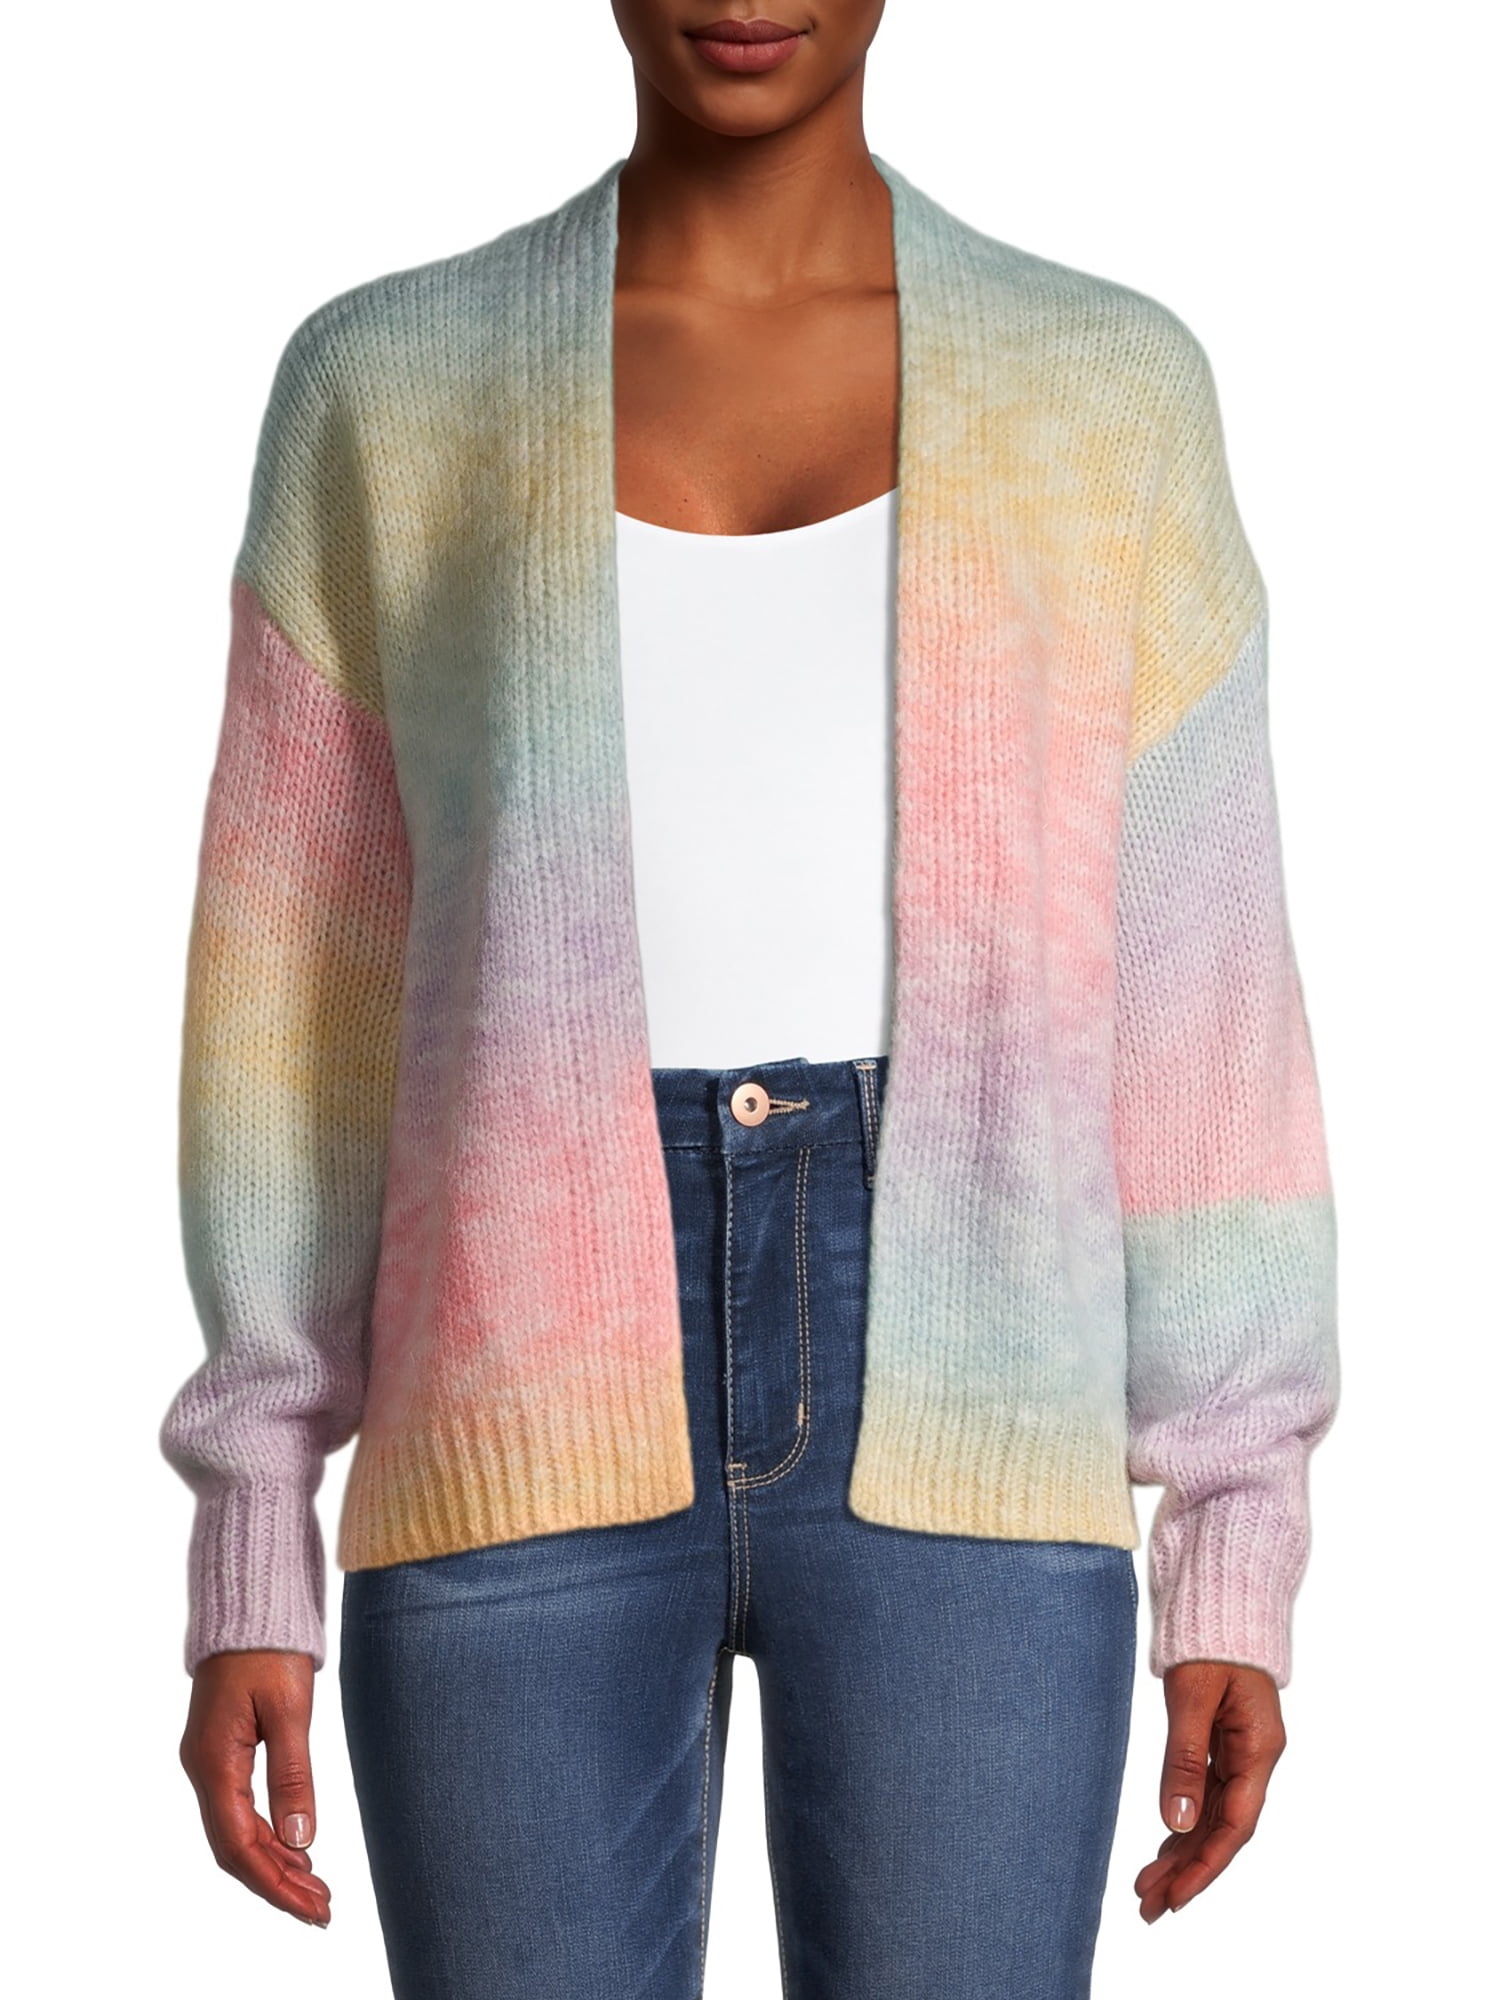 Dreamers by Debut Women's Rainbow Marled Cardigan Sweater -